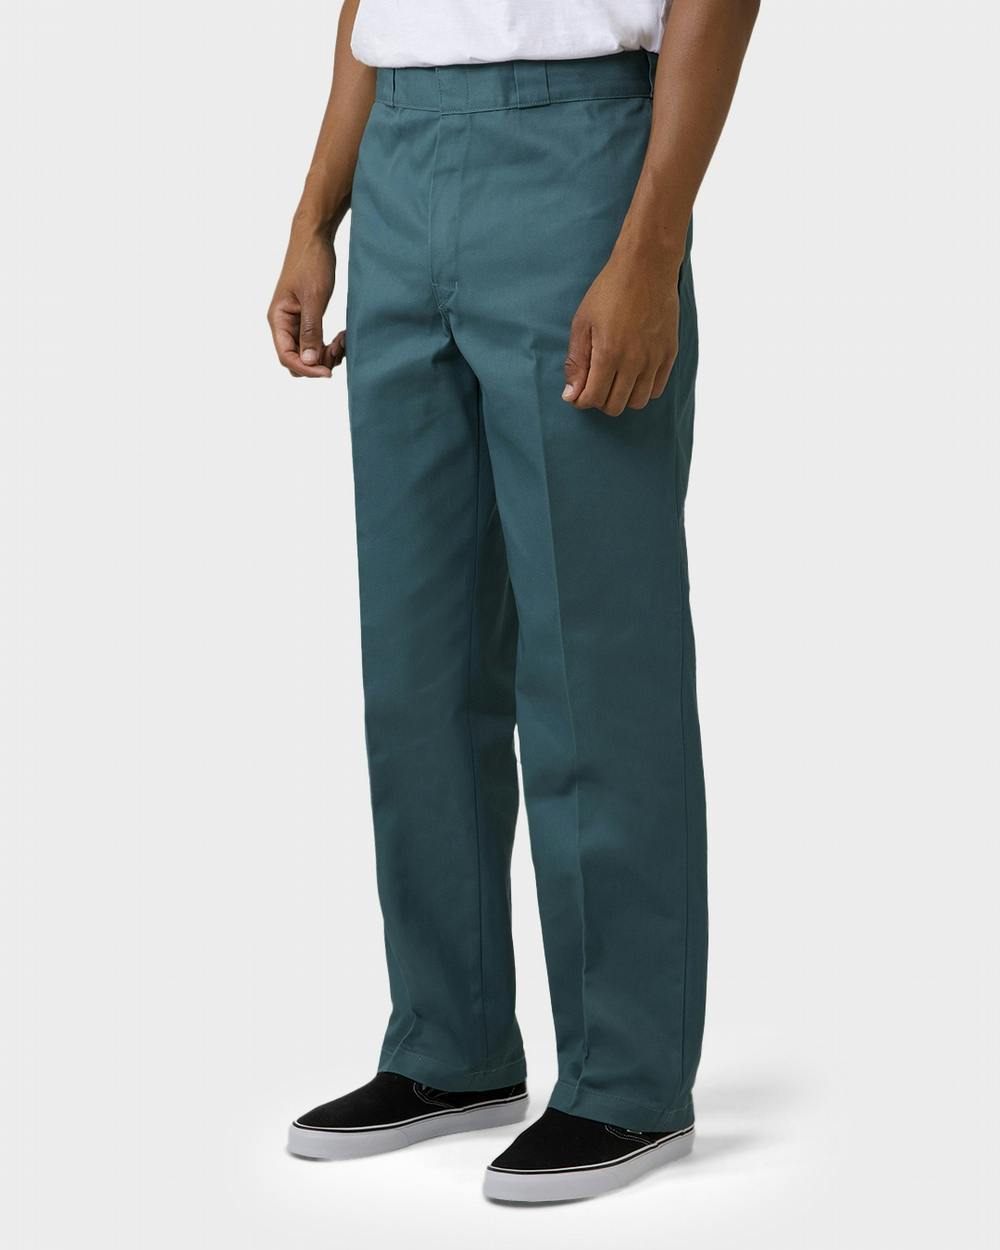 DICKIES 874 Original Relaxed Pant - Lincoln Green